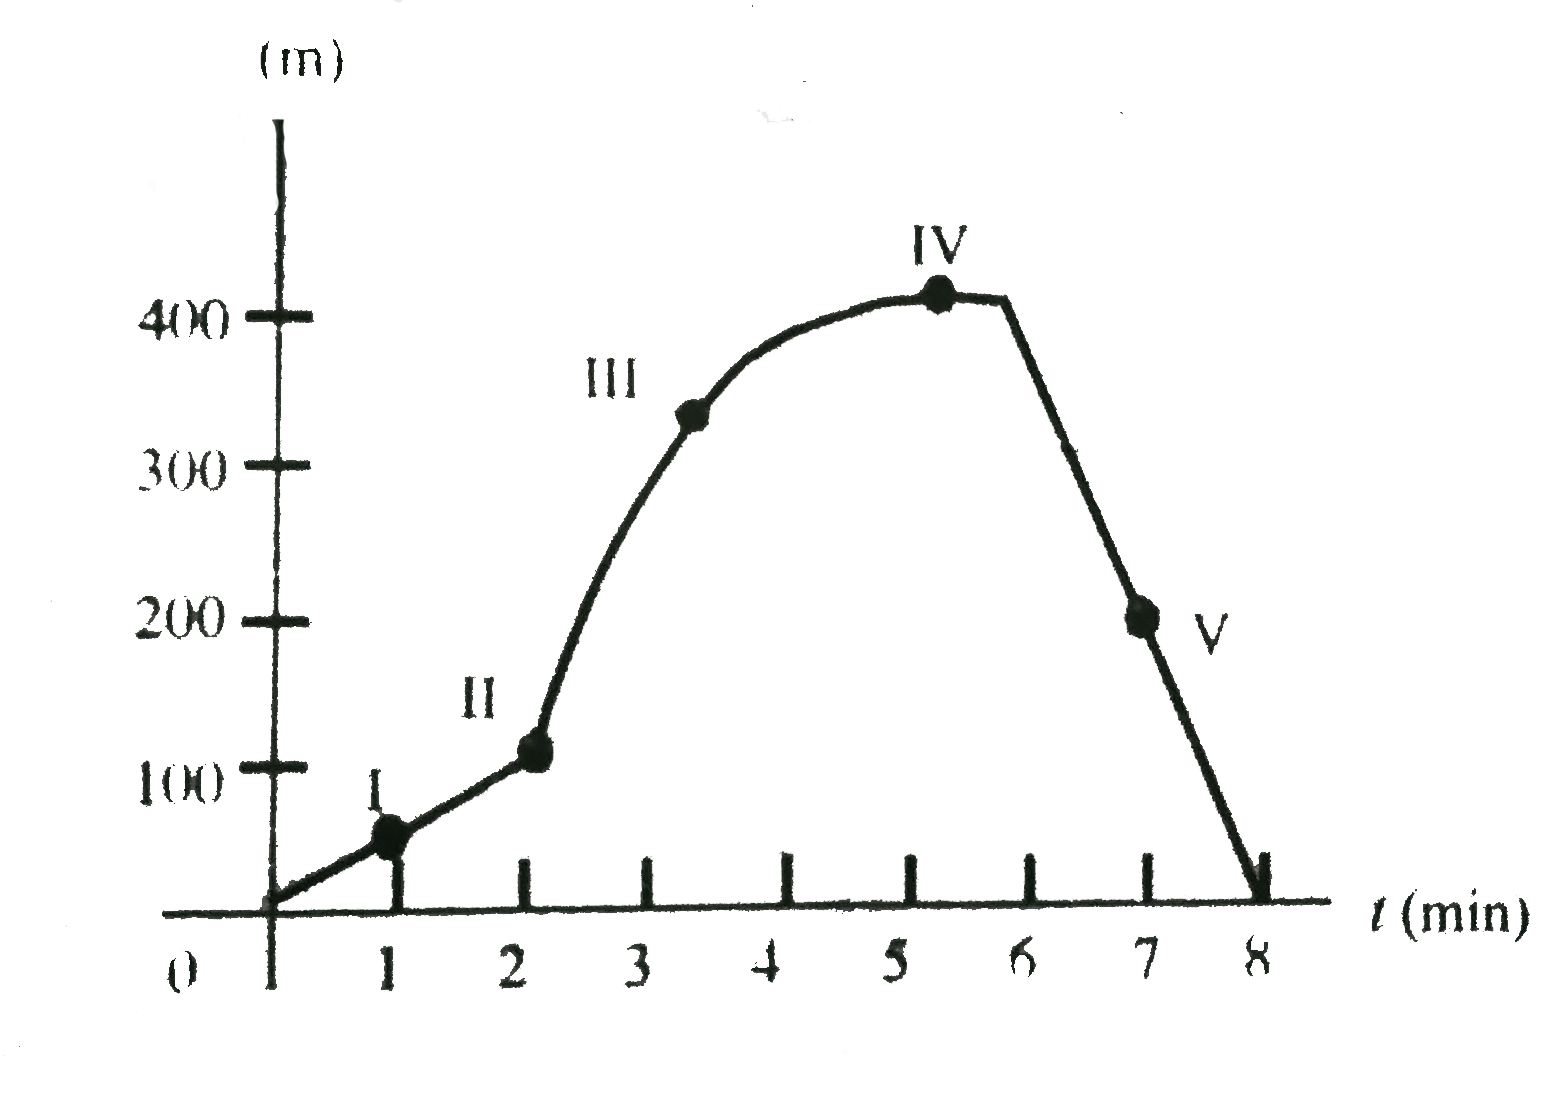 A physics professor leaves her house and walks along the sidewalk towards campus. After 5 min, it starts to tain and she terurns home. Her distance from her house as a function of time is shown in .   .   At which of the labeld points is her velocity   a. Zero    b. Constant and positive   c.  Constant and negative   d. Increasing in magnitude .